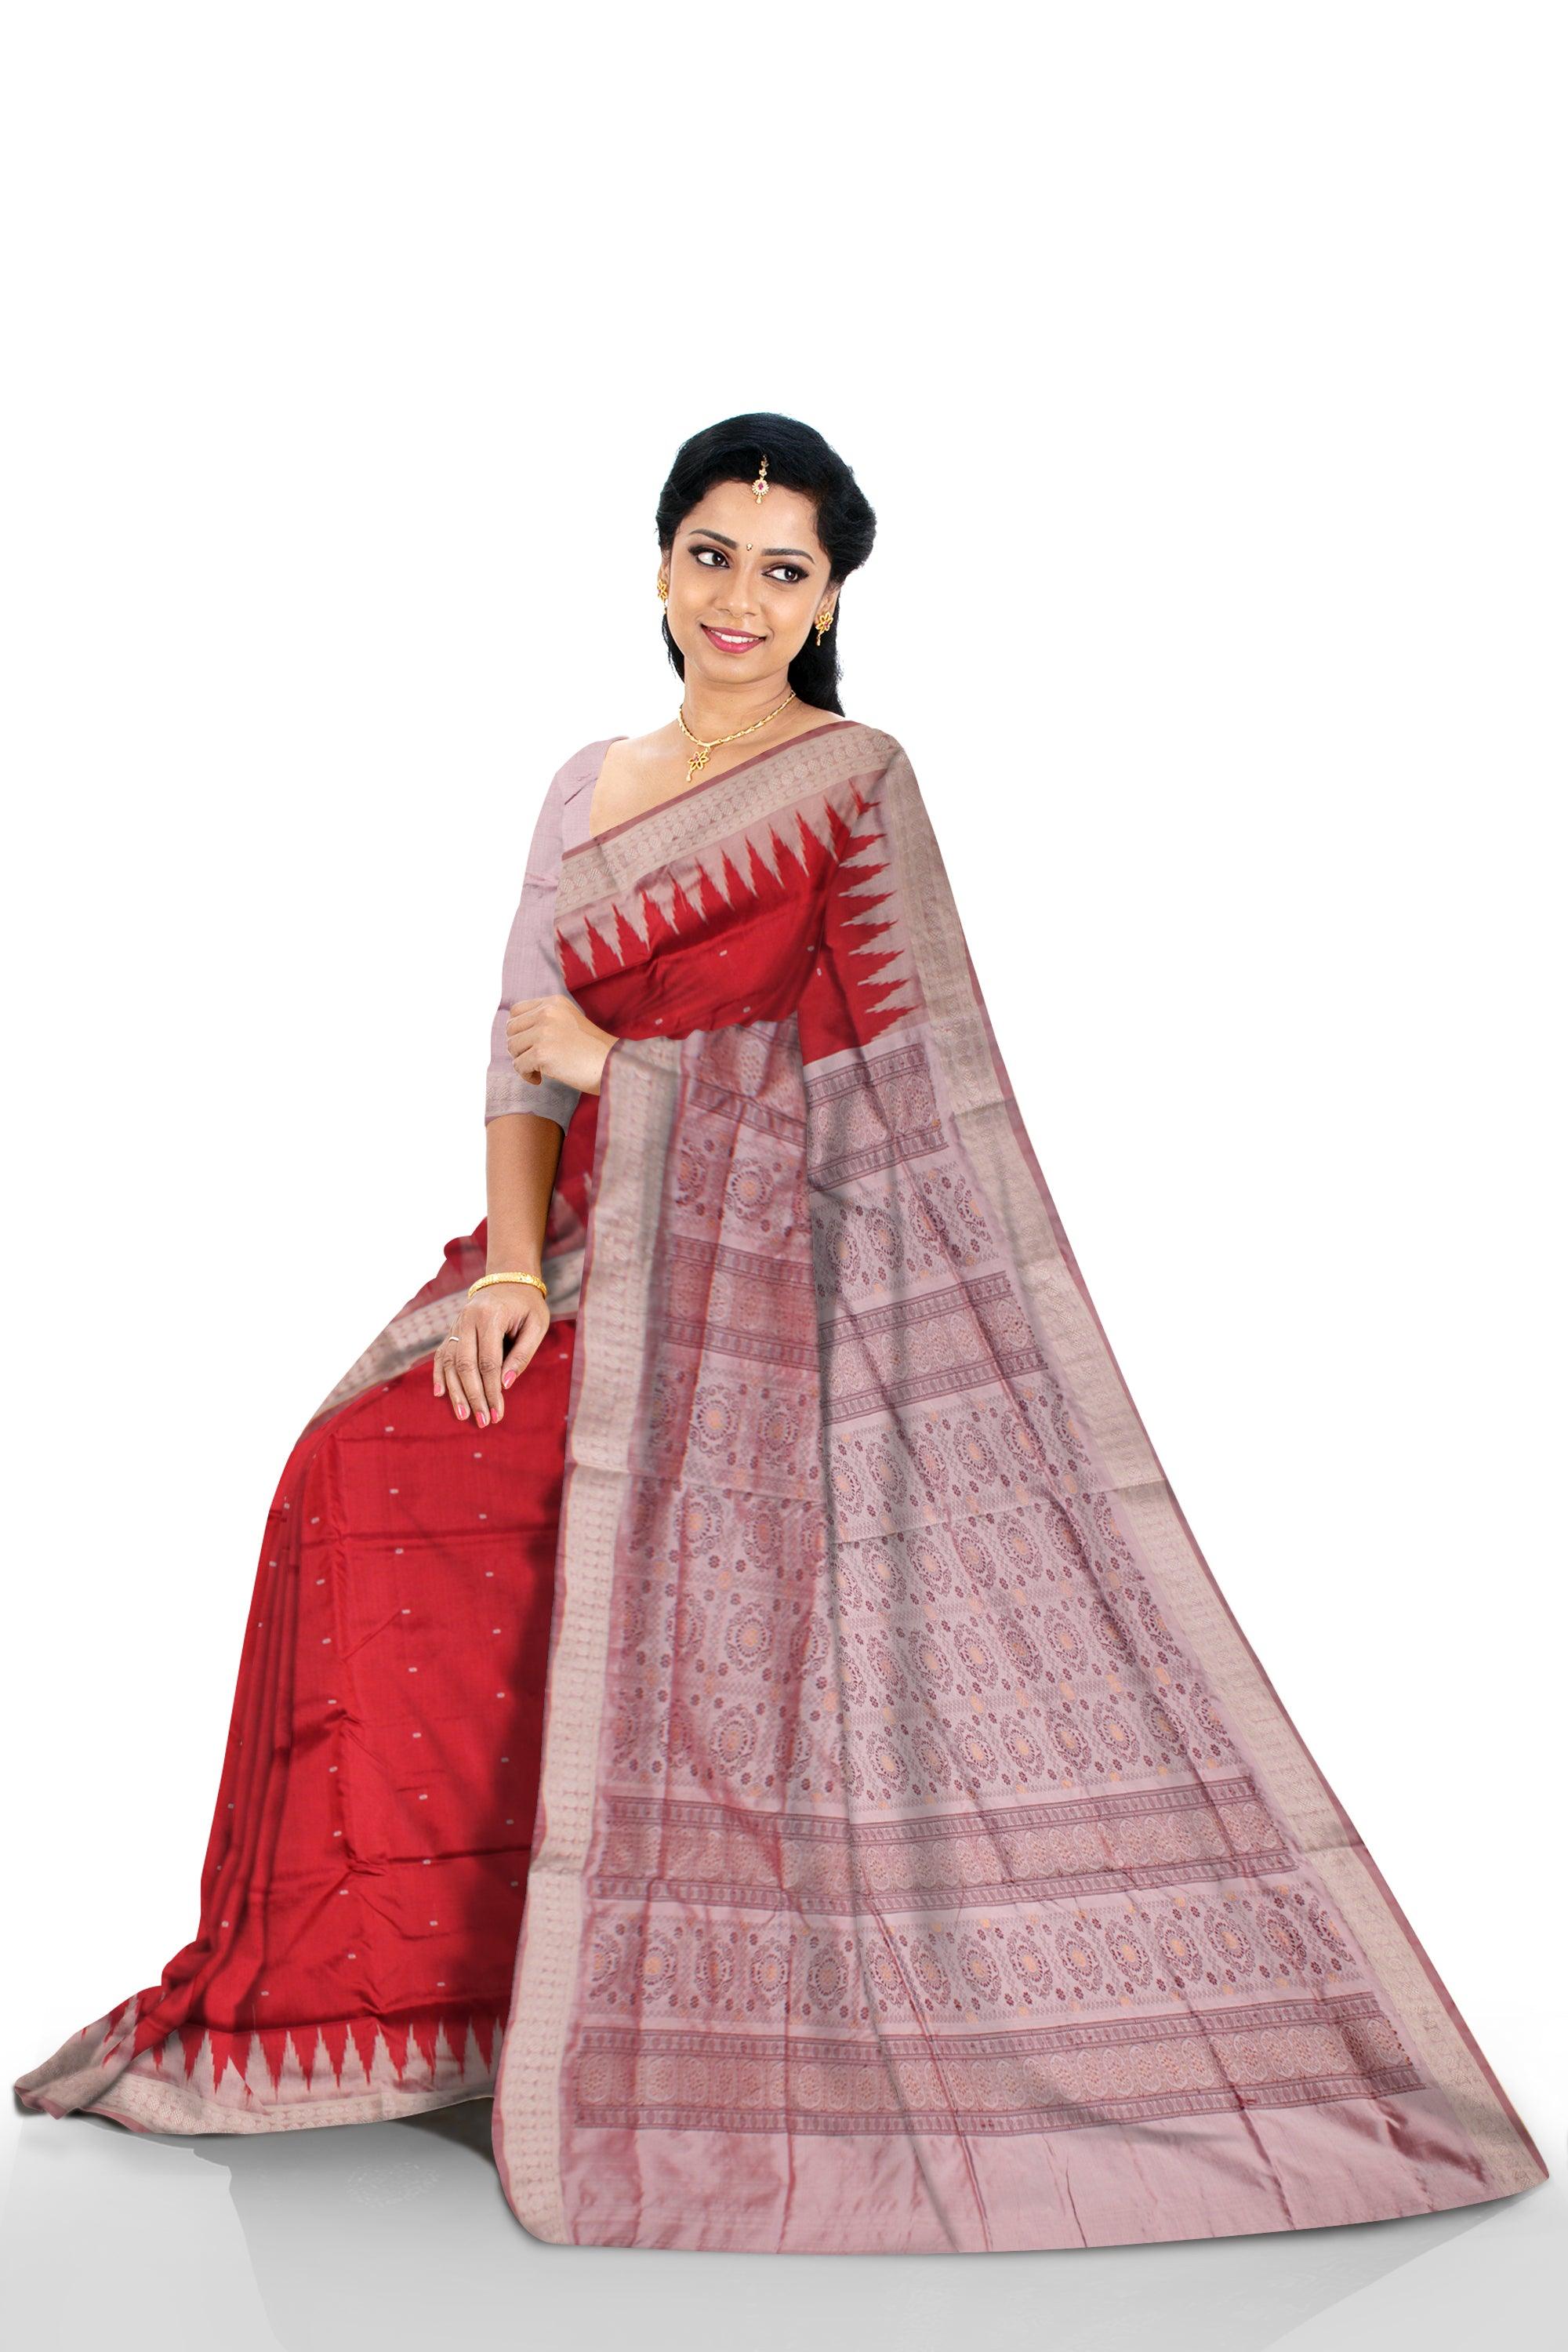 MARRAIGE COLLECTION SMALL BOTTY PATTERN PATA SAREE IS RED AND GRAY COLOR BASE, AVAILABLE WITH MATCHING BLOUSE PIECE. - Koshali Arts & Crafts Enterprise